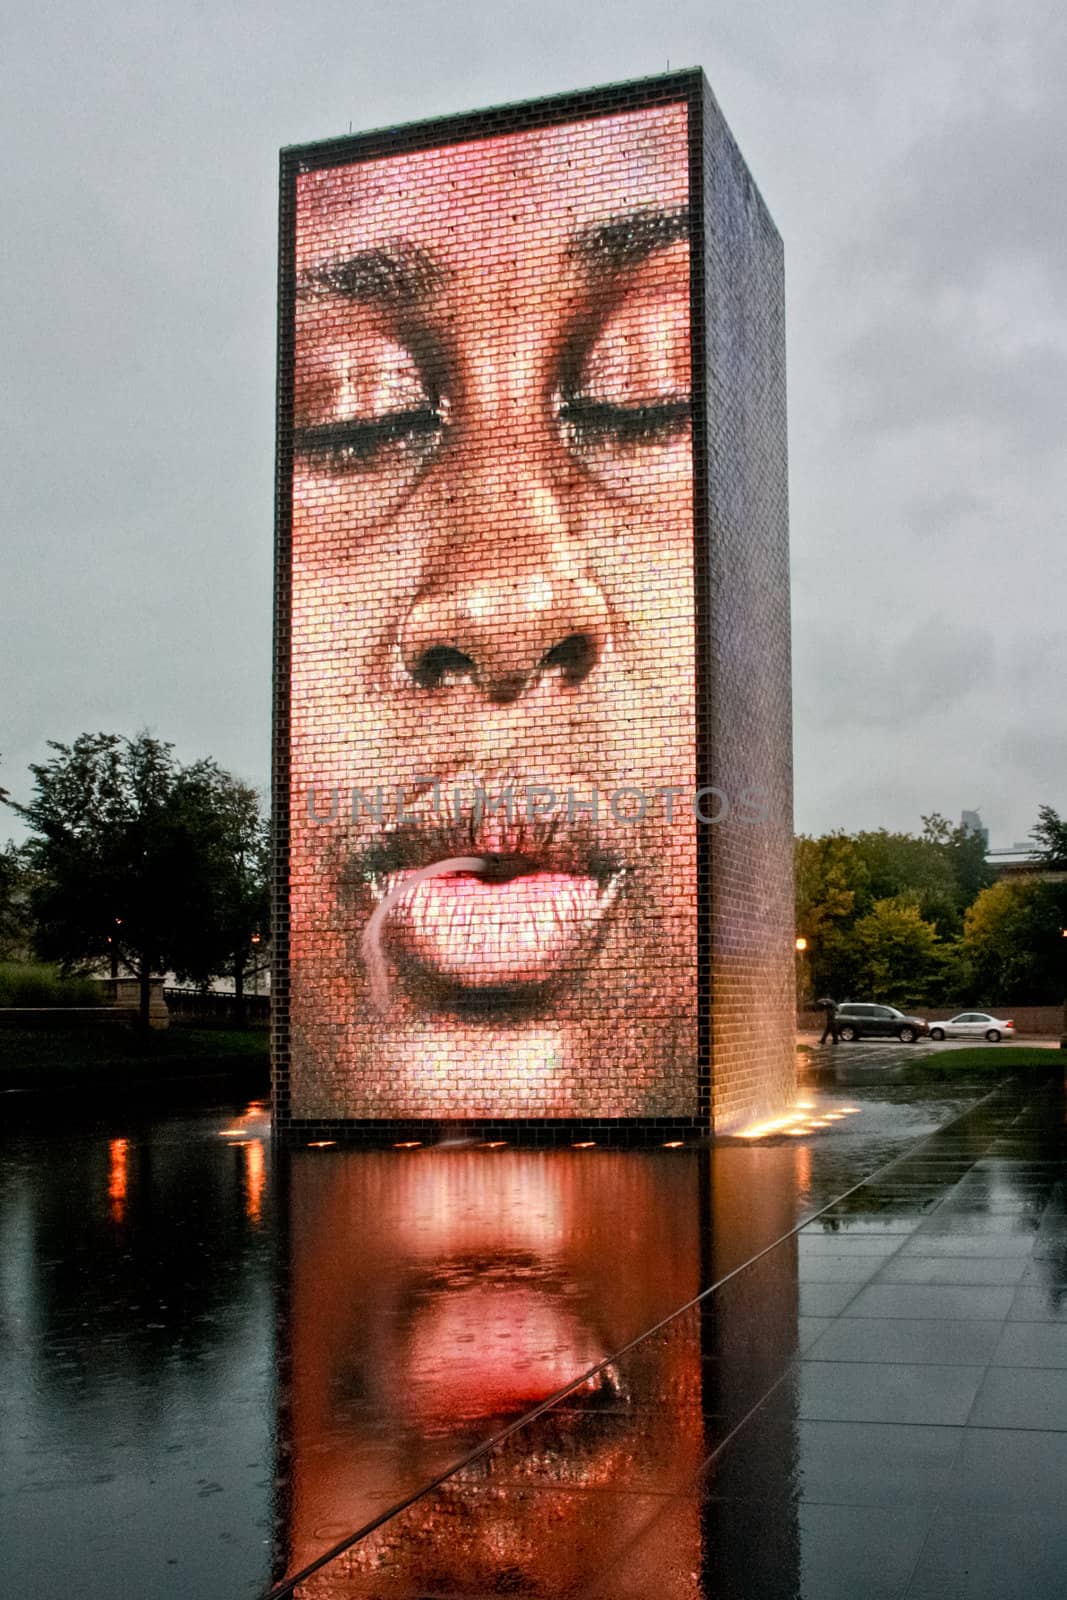 An image of a person projected on a giant Chicago Crown Fountain structure